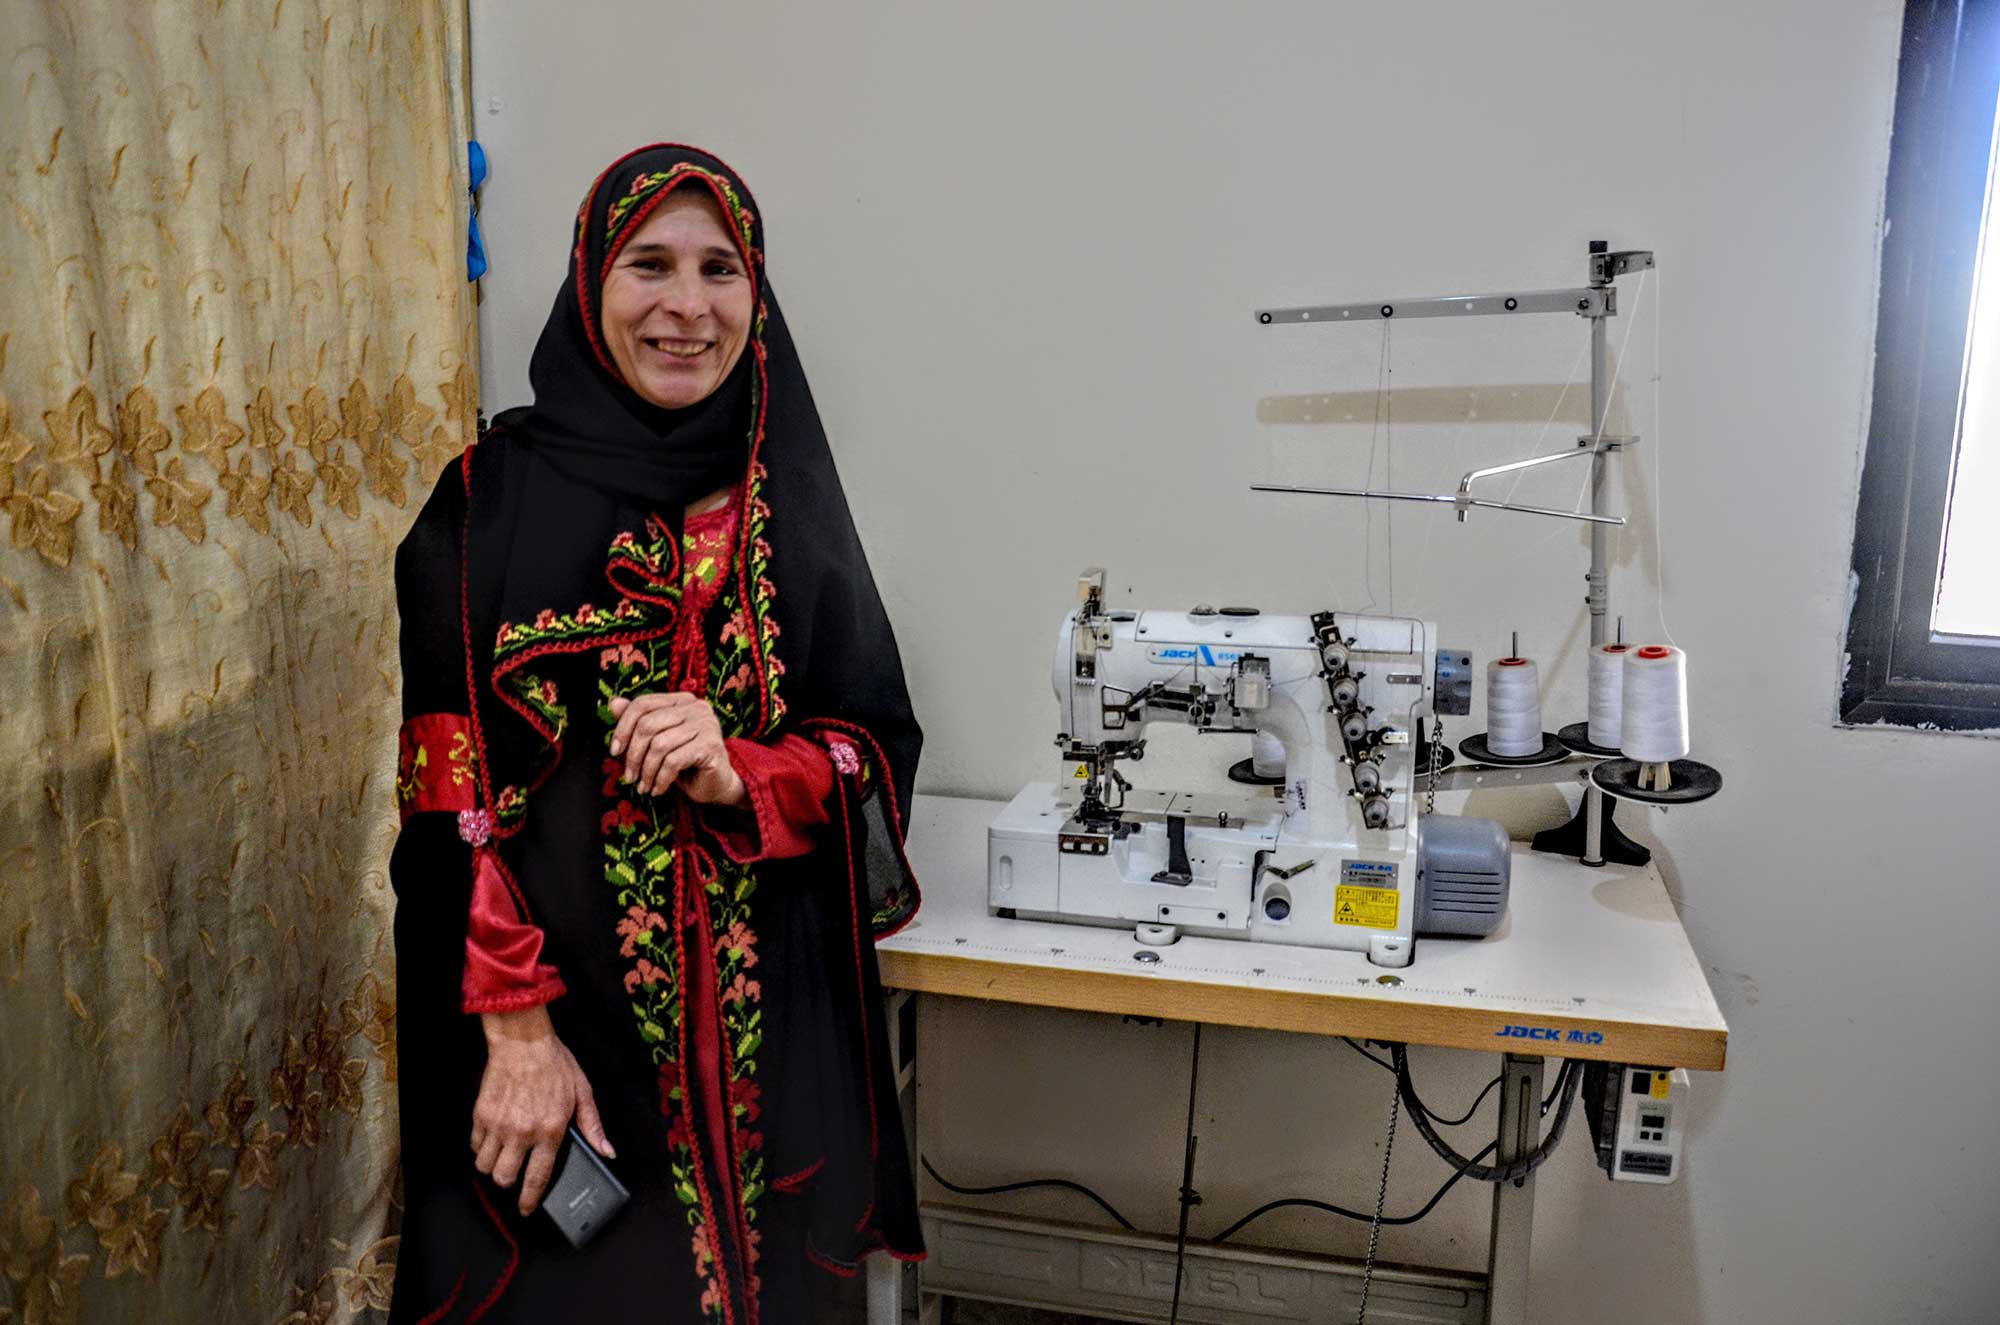 Palestinian dressmaker Asmaa with her new sewing machine from Anera